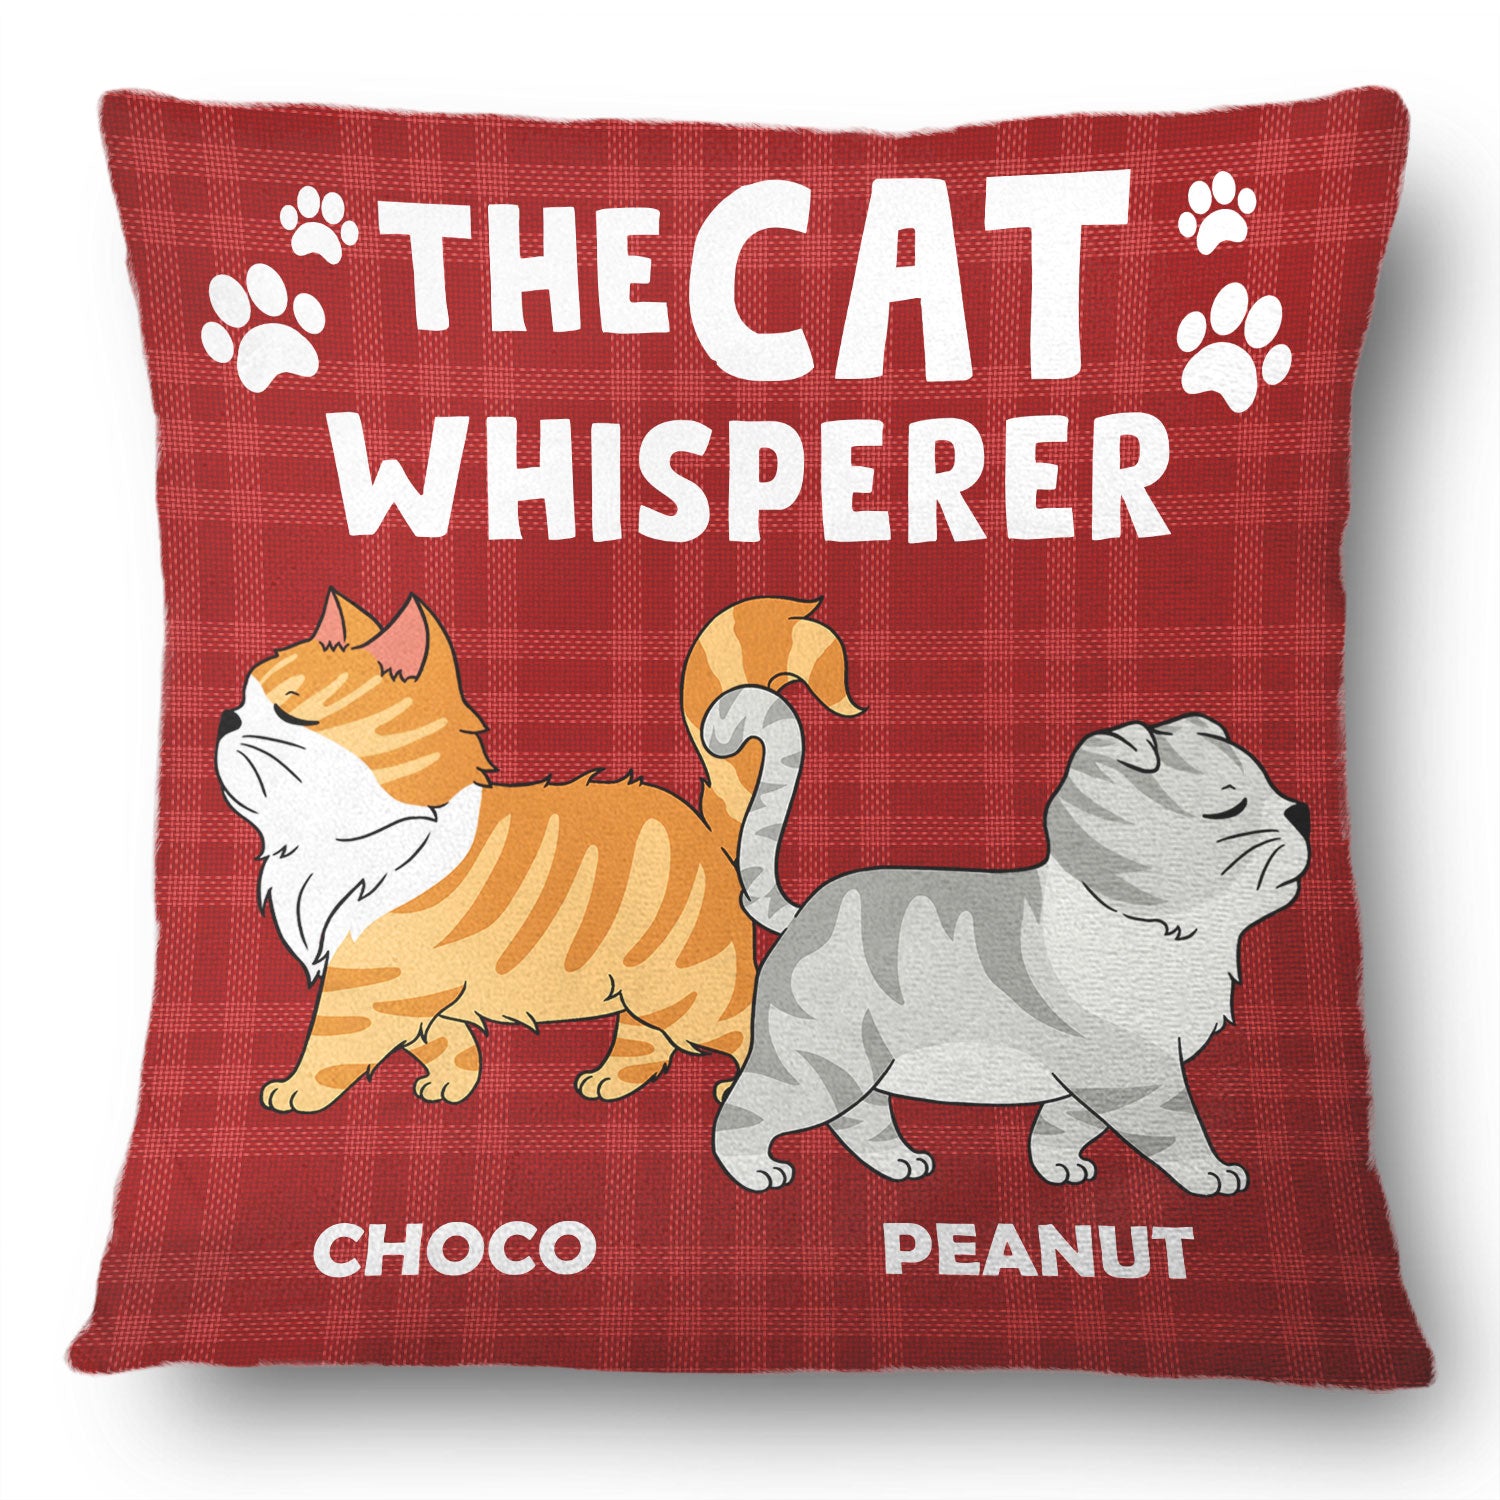 The Cat Whisperer - Gift For Cat Lovers - Personalized Pillow